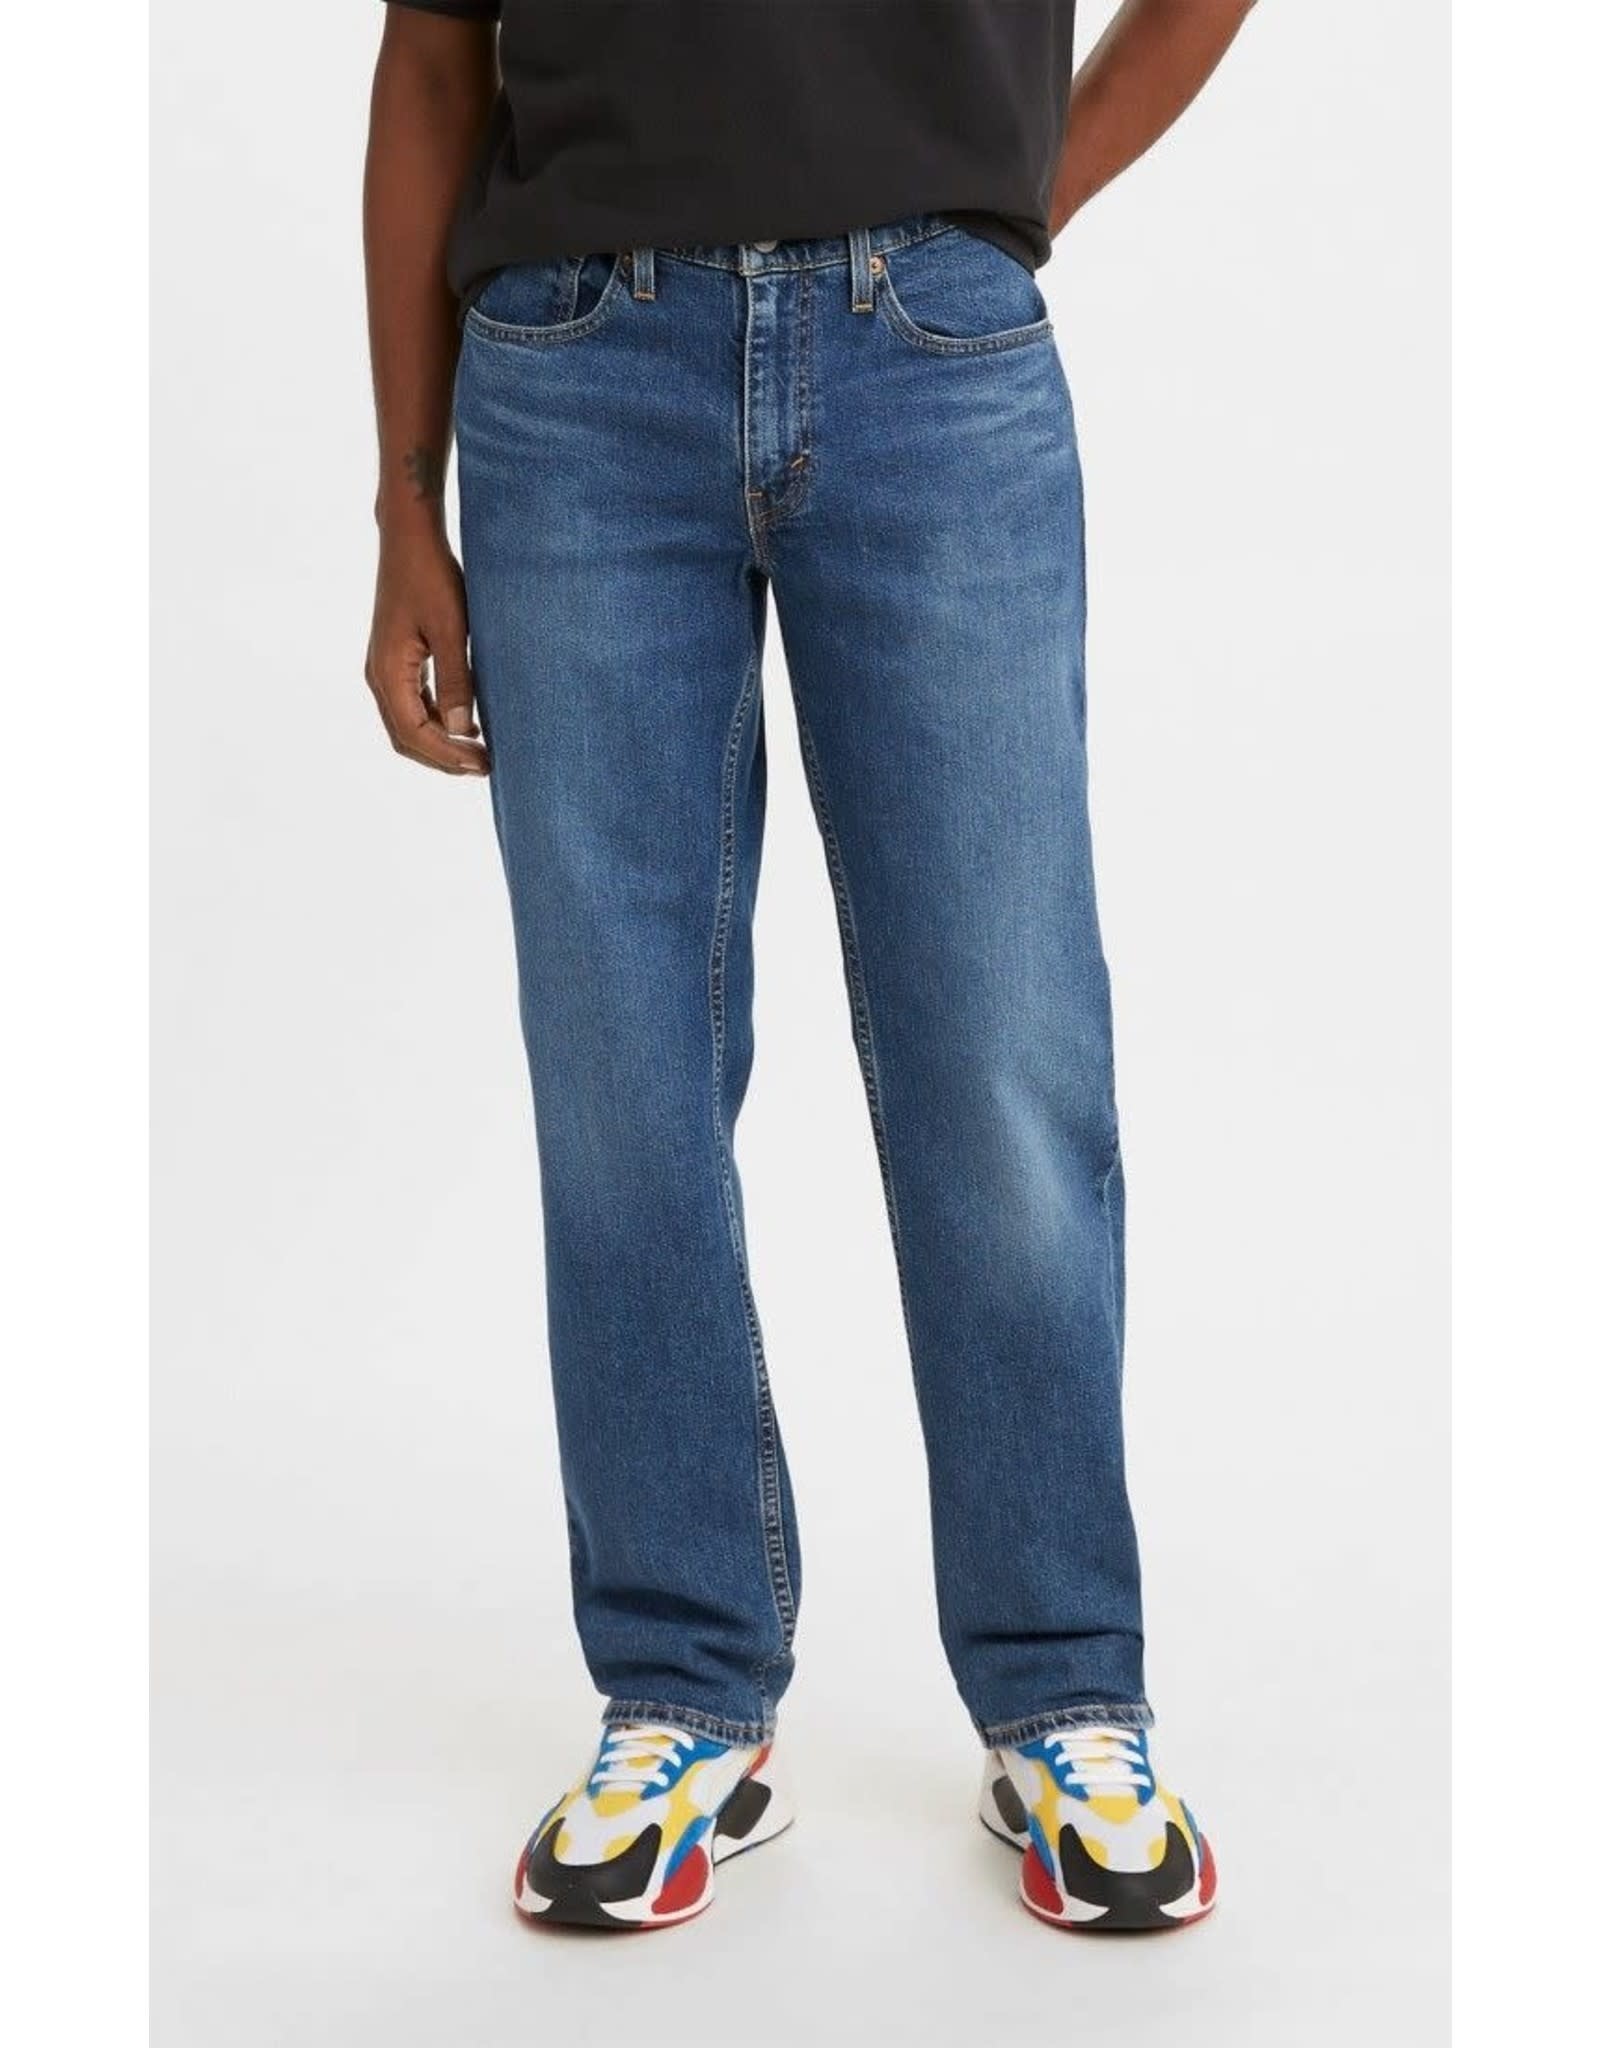 Levis Men's 514 Straight - 42nd Street Clothing